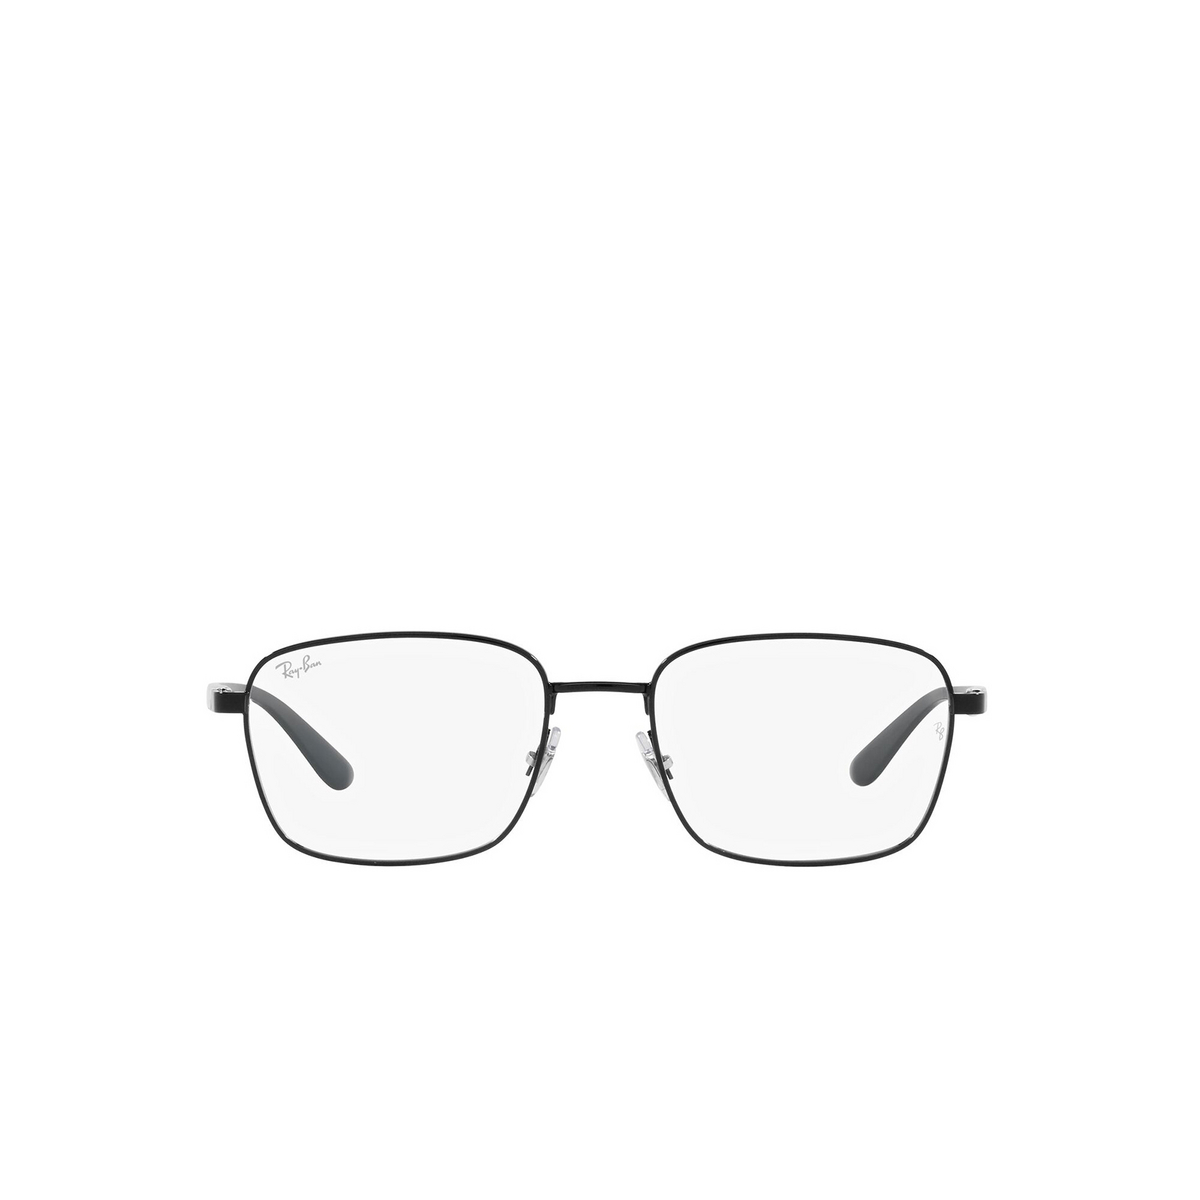 Ray-Ban® Square Eyeglasses: RX6478 color Black 3057 - front view.